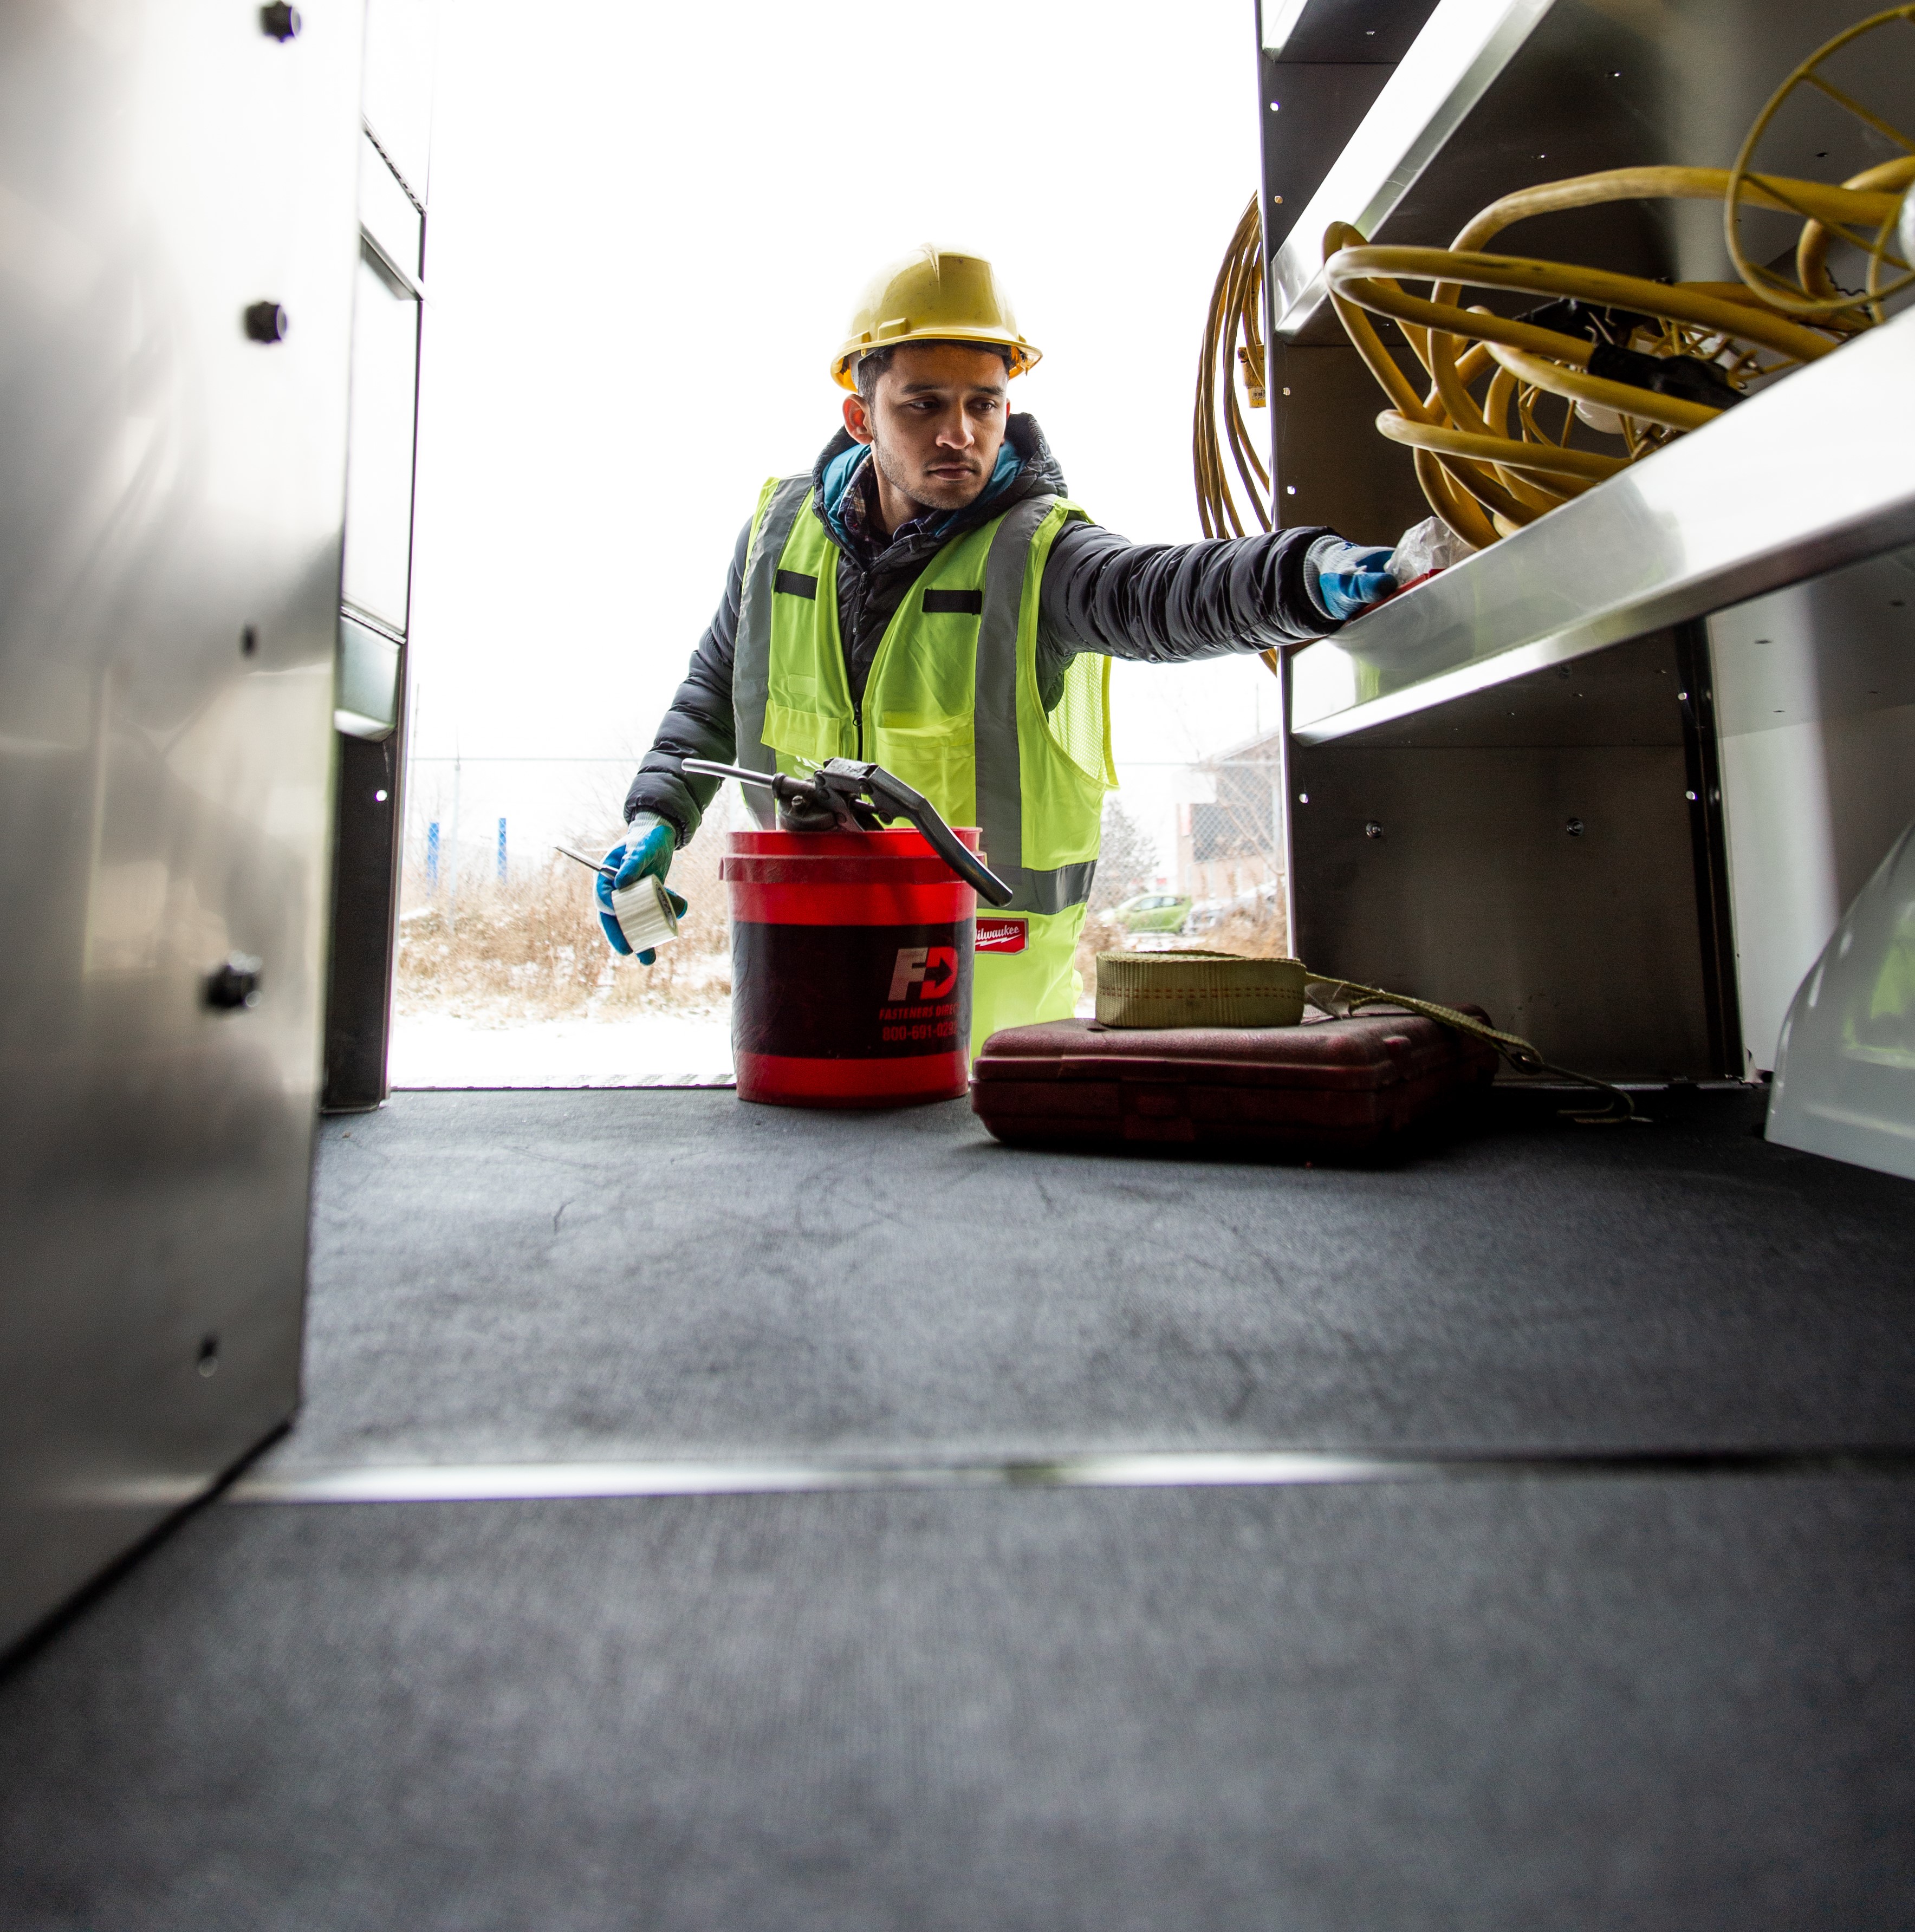 A service worker being productive and efficient in a van lined with safe and durable Legend floors and liners